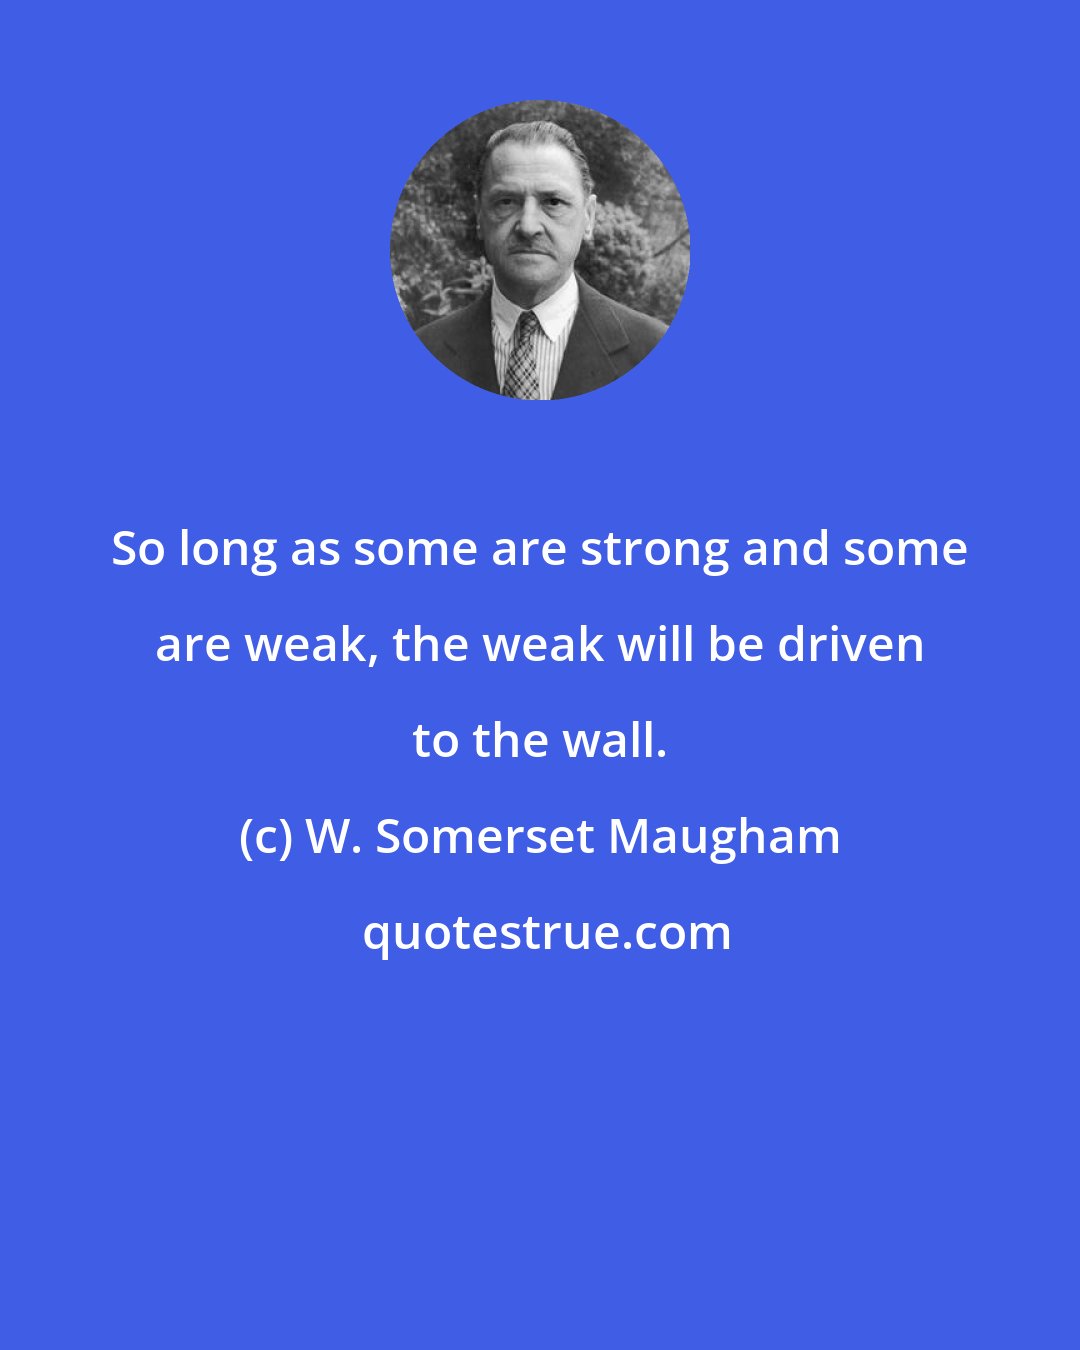 W. Somerset Maugham: So long as some are strong and some are weak, the weak will be driven to the wall.